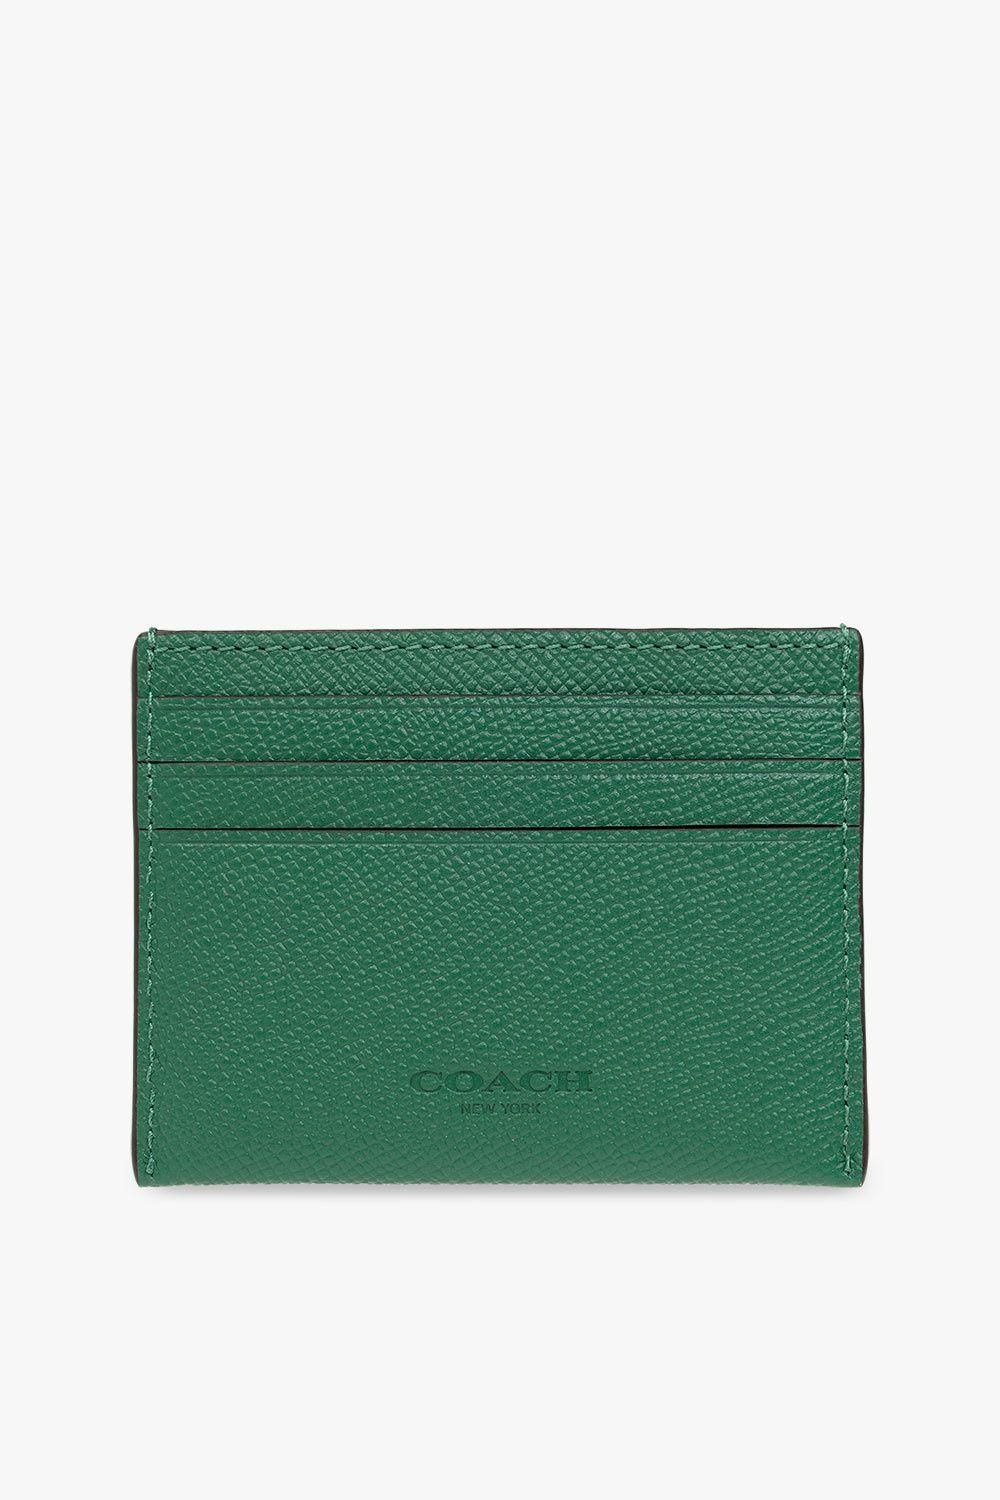 COACH Card Holder With Logo in Green | Lyst